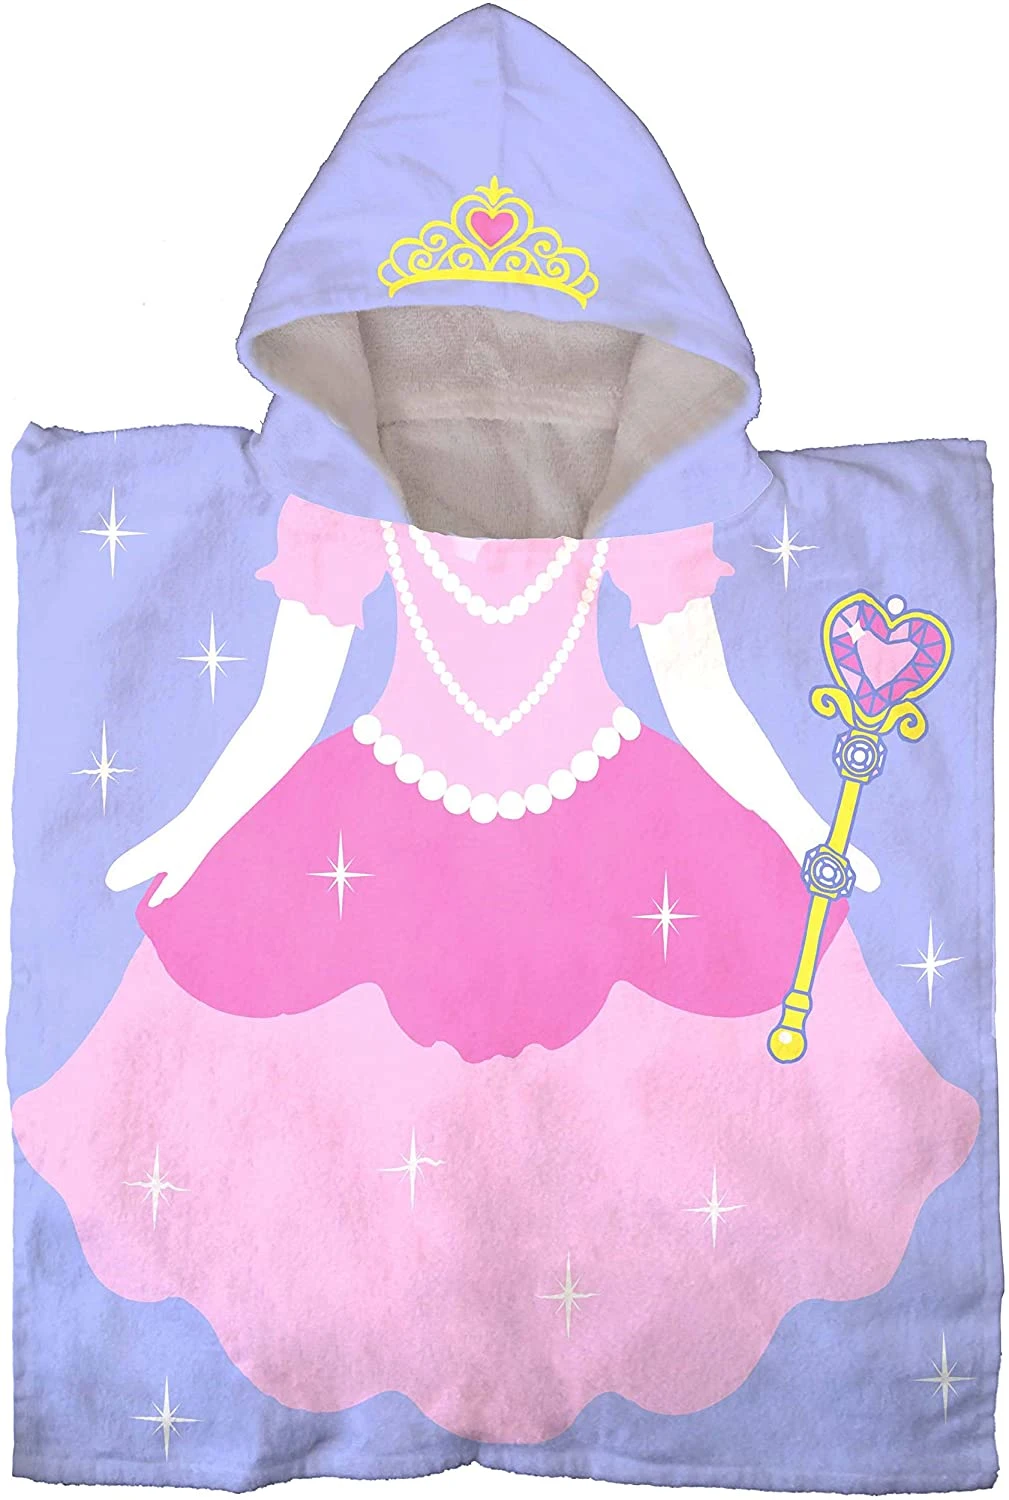 Princess Kids Bath/Pool/Beach Hooded Poncho Towel - Super Soft & Absorbent Cotton Towel, Measures 22 Inch X 22 Inch